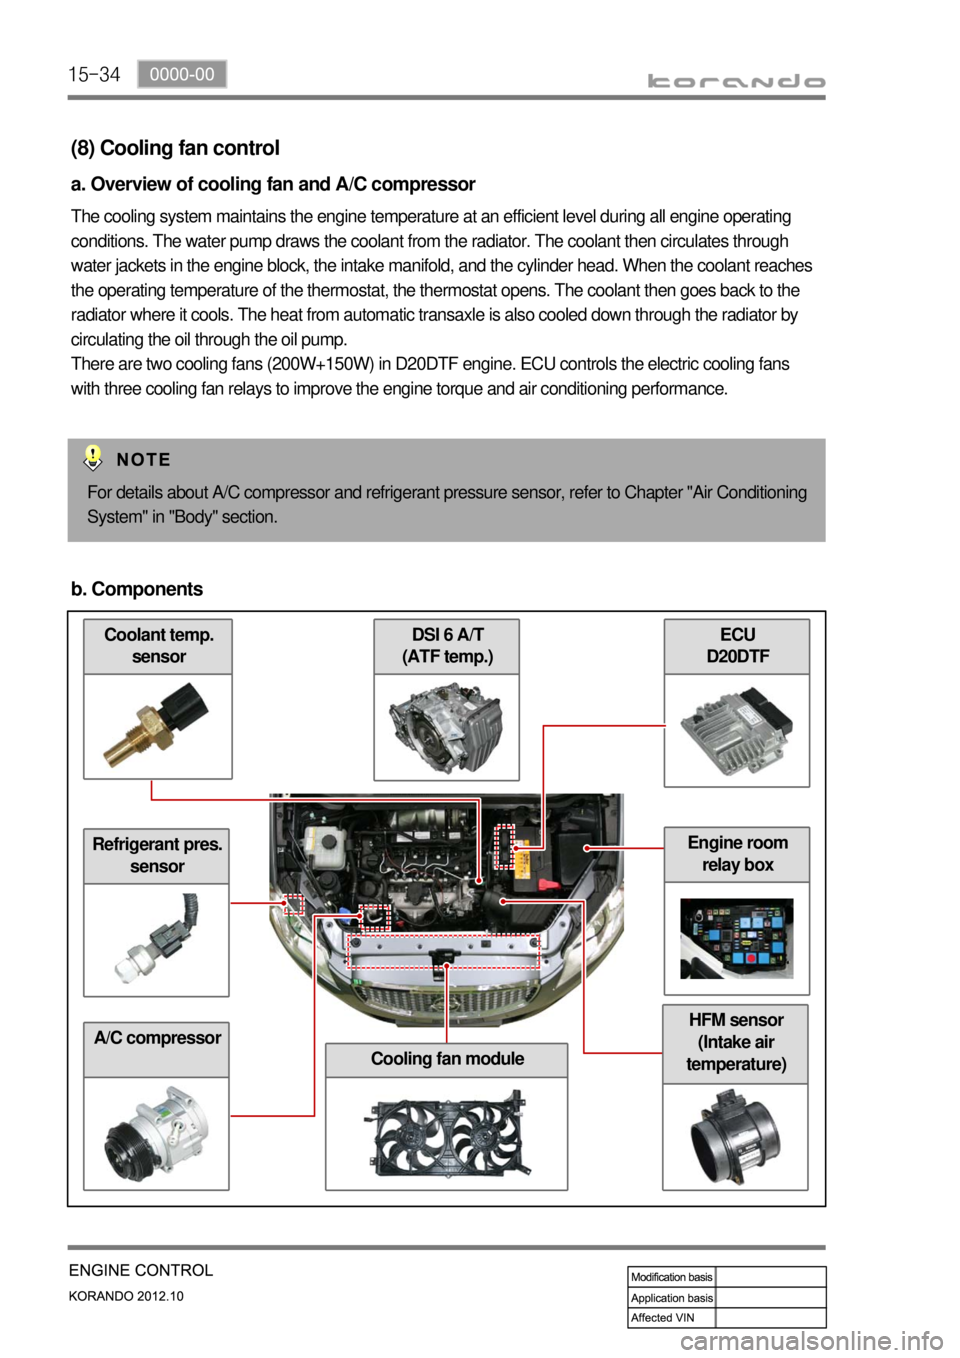 SSANGYONG KORANDO 2012  Service Manual 15-34
Coolant temp. 
sensor
(8) Cooling fan control
a. Overview of cooling fan and A/C compressor
The cooling system maintains the engine temperature at an efficient level during all engine operating 